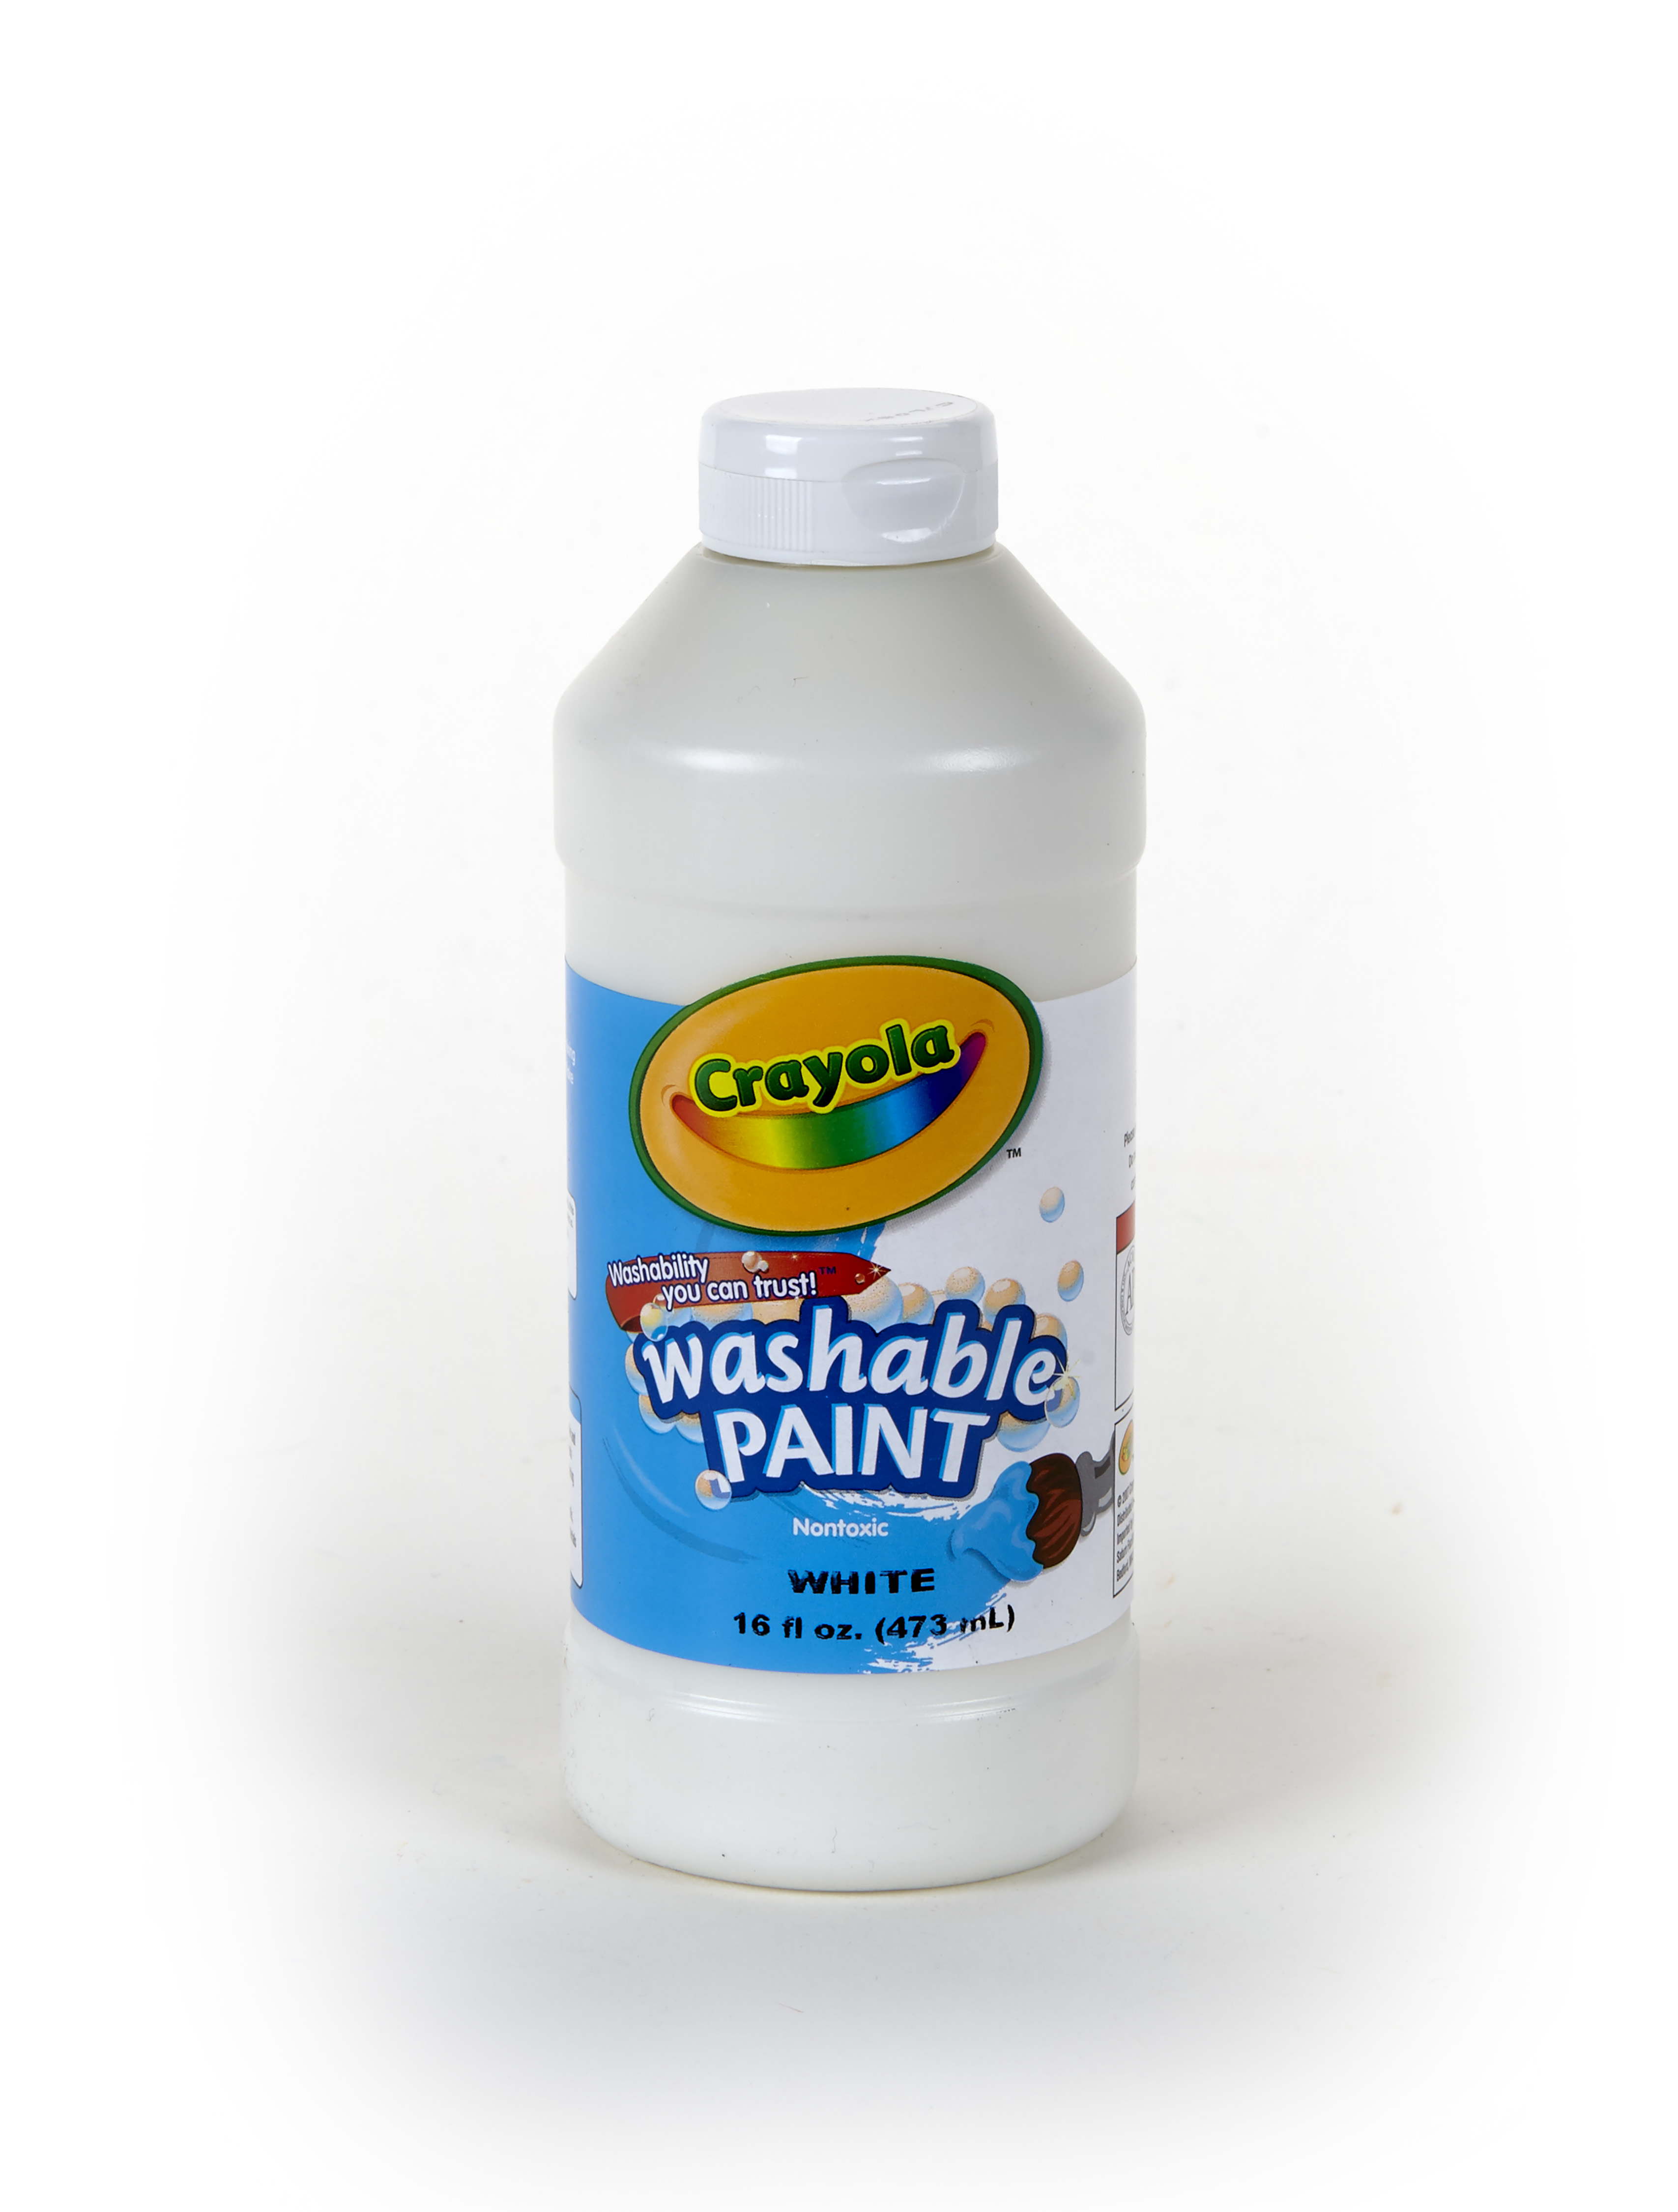 Crayola Kid's White Washable Tempera Paint in 16 oz. Bottle with Easy Dispensing - image 1 of 7